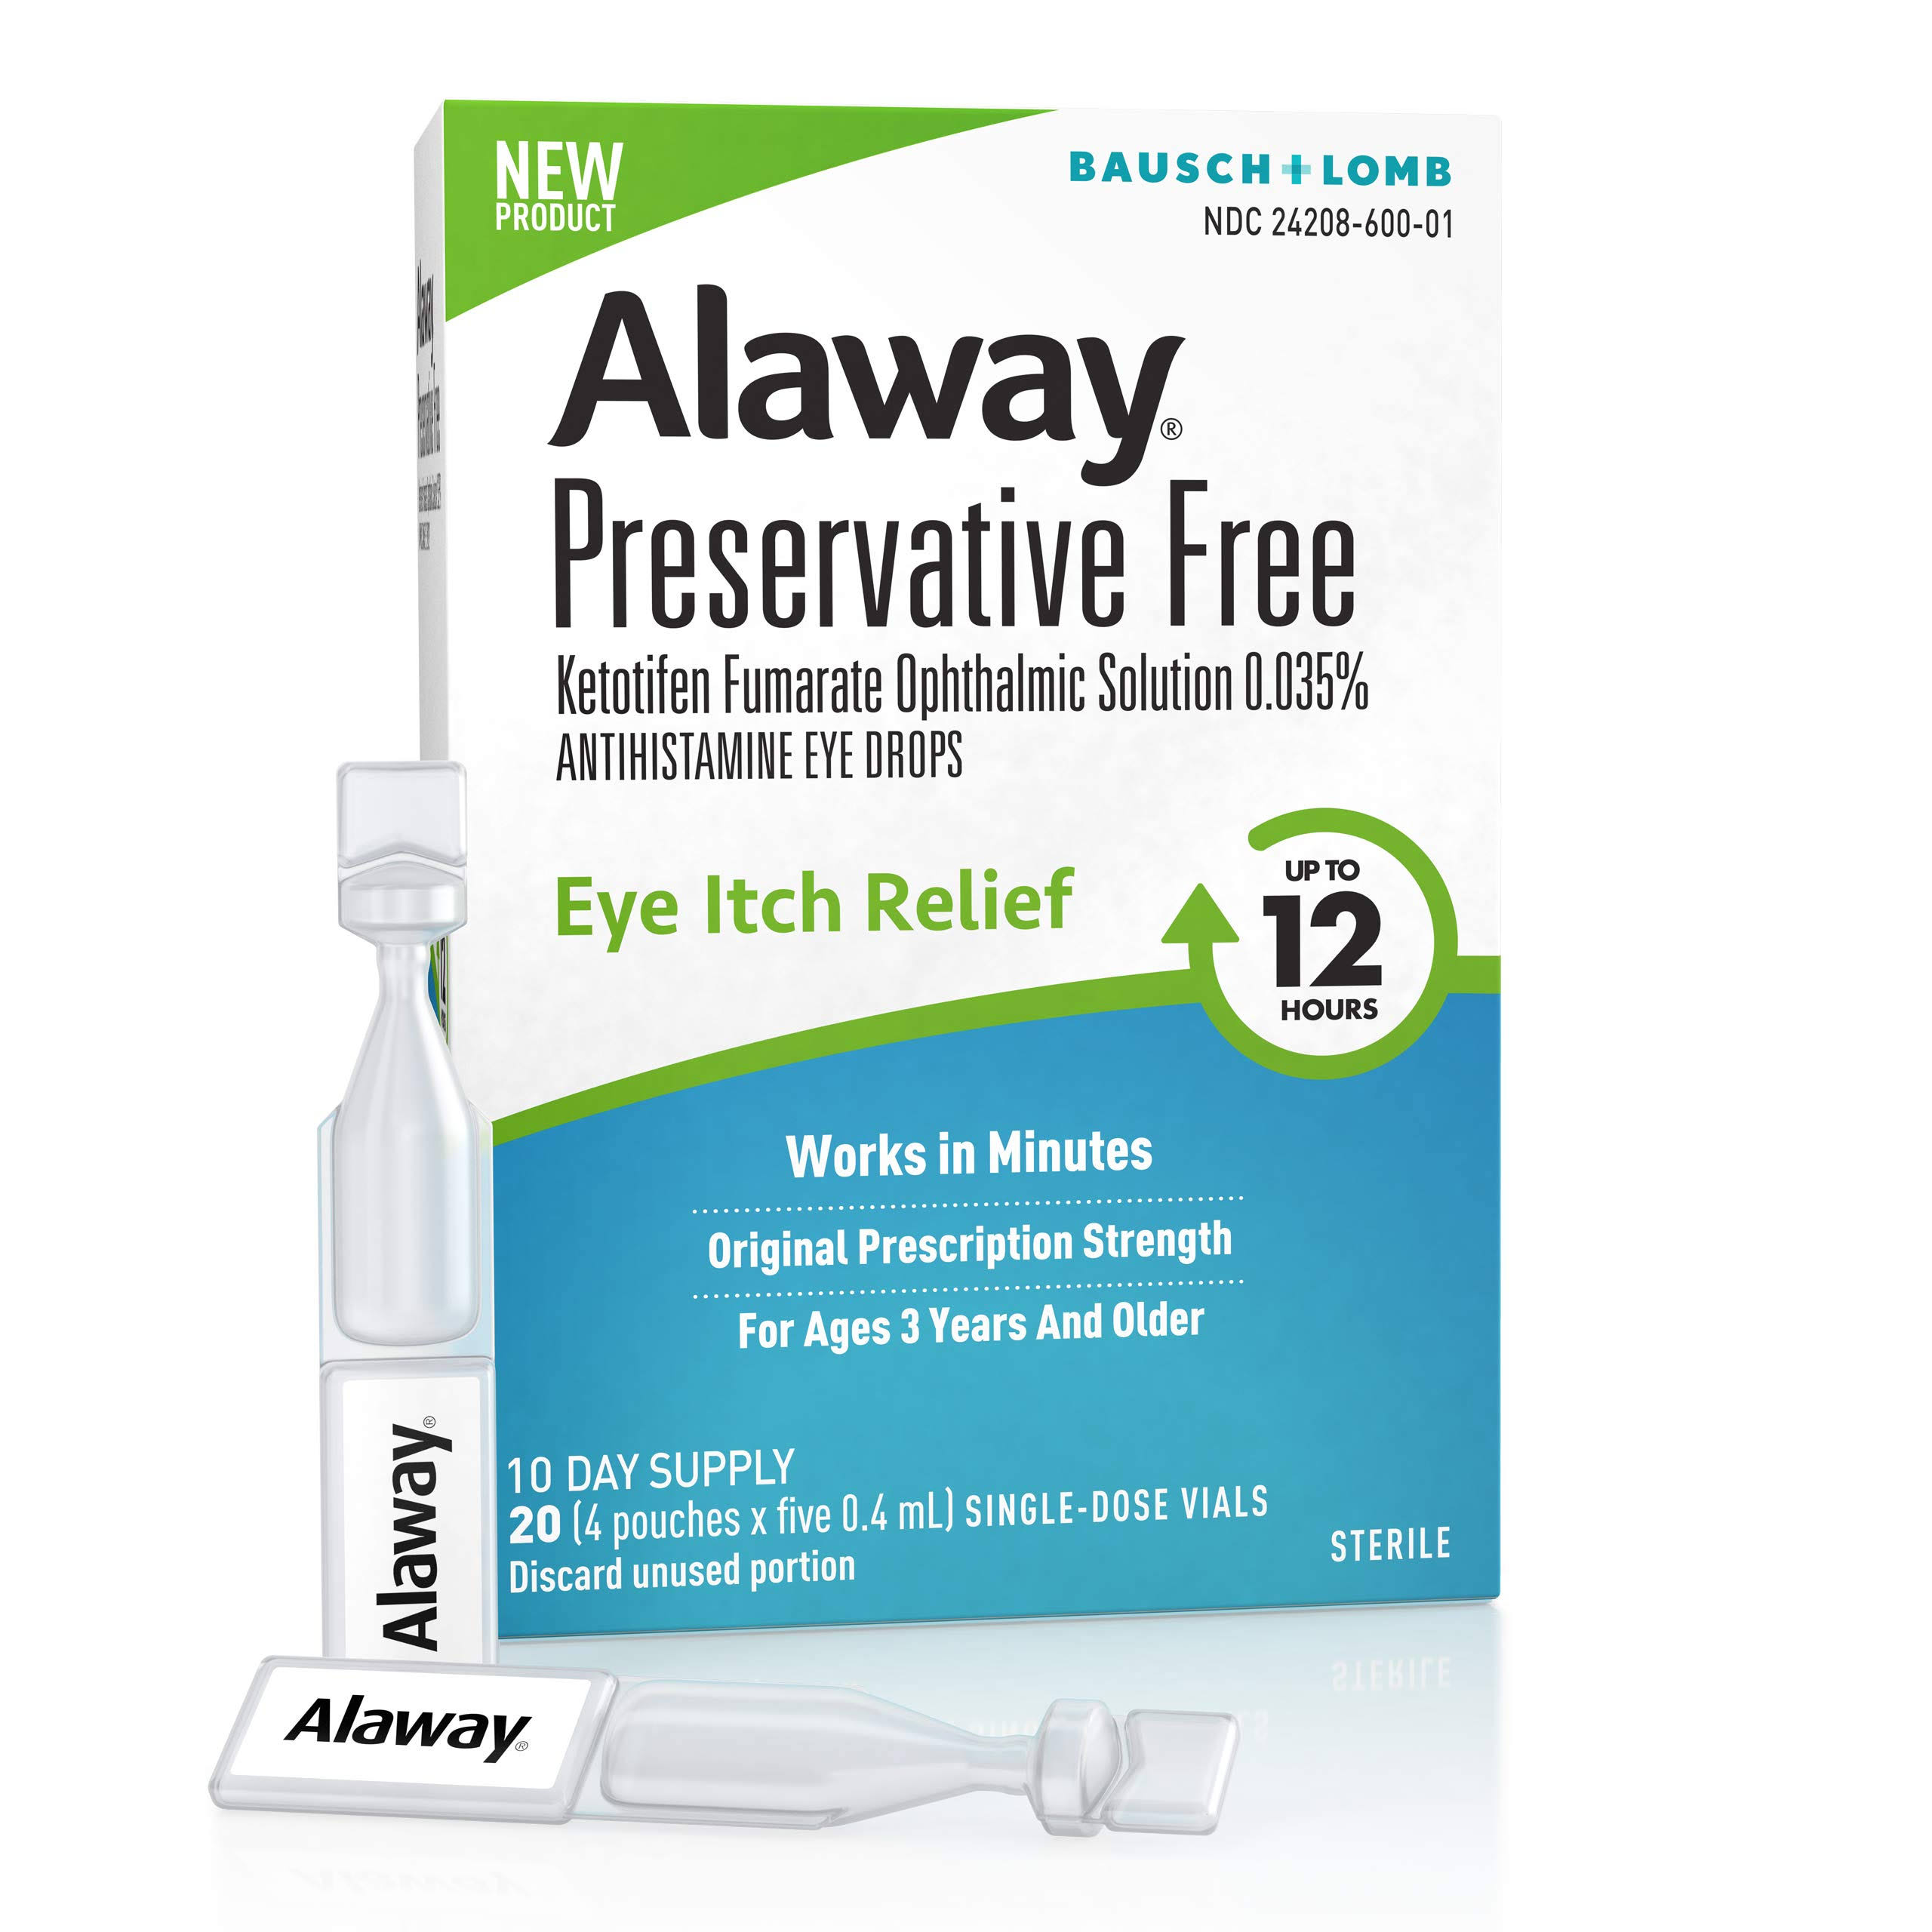 Alaway Eye Drops, Preservative Free Antihistamine Eye Drops for up to 12 Hours of Eye Itch Relief, 20 Single-Dose Vials